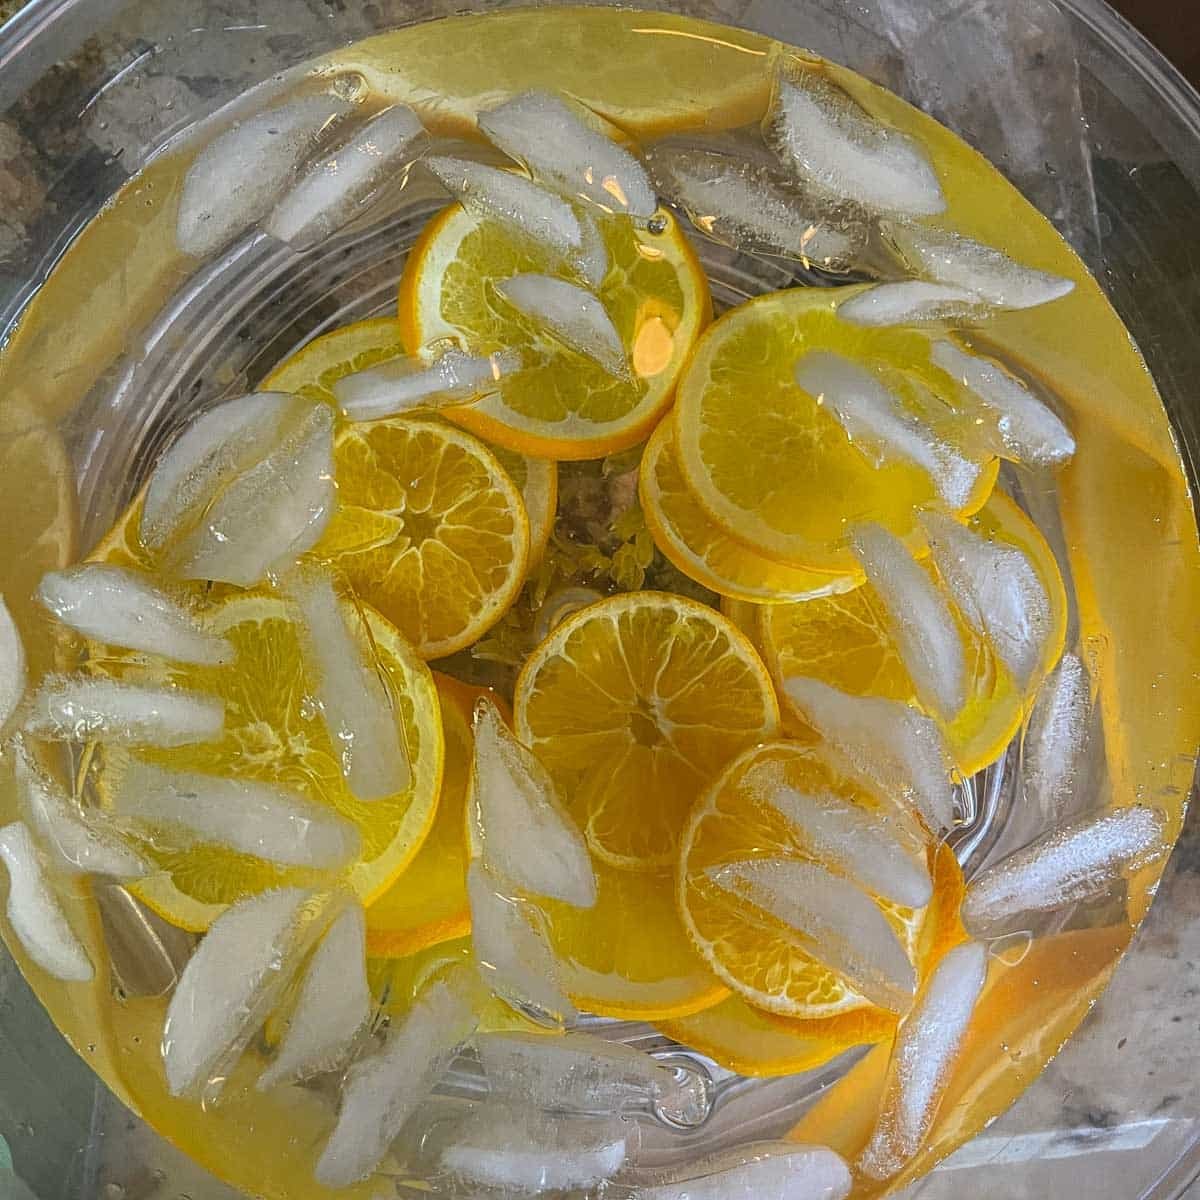 candied orange slices in ice water